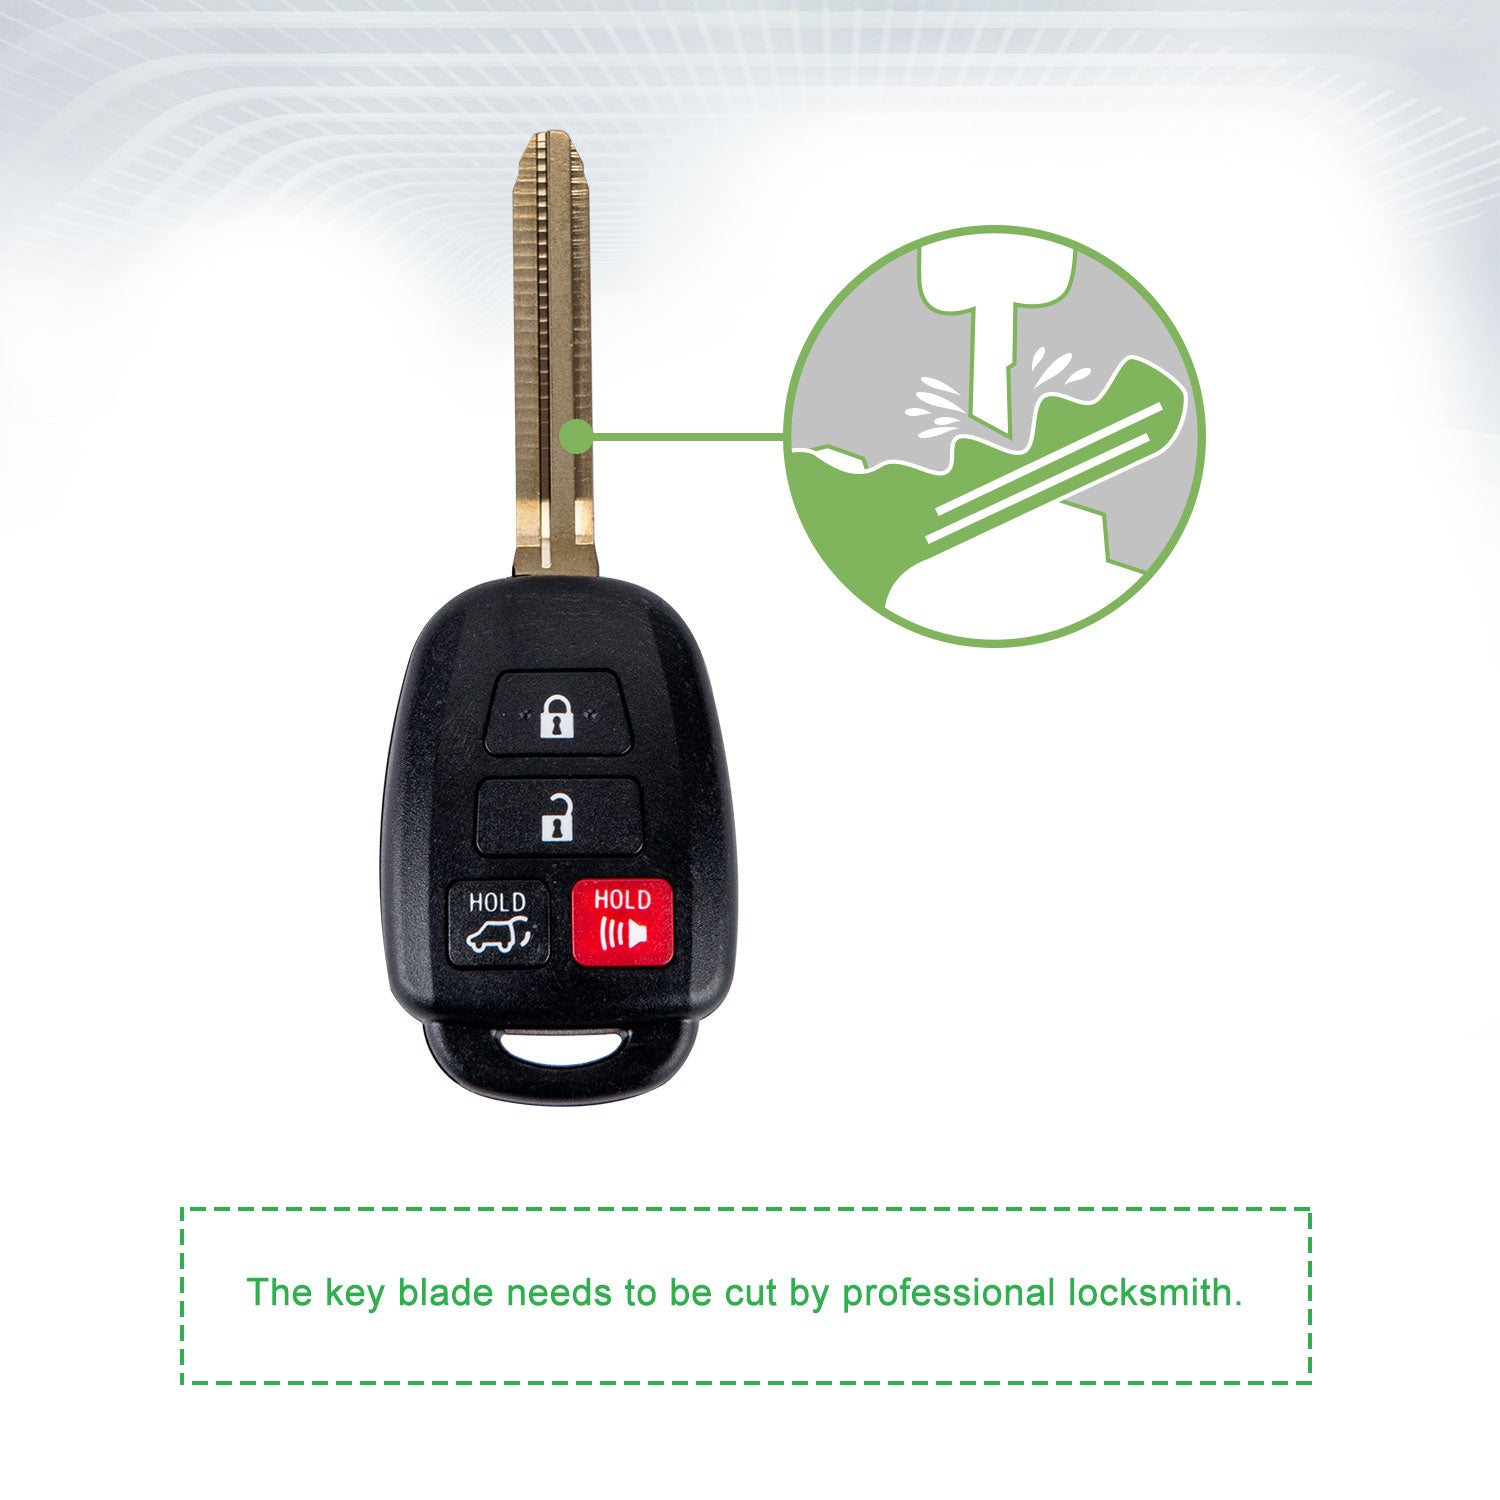 Extra-Partss Remote Car Key Fob Replacement for Toyota GQ4-52T fits 2014 2015 2016 2017 2018 2019 Highlander H Chip